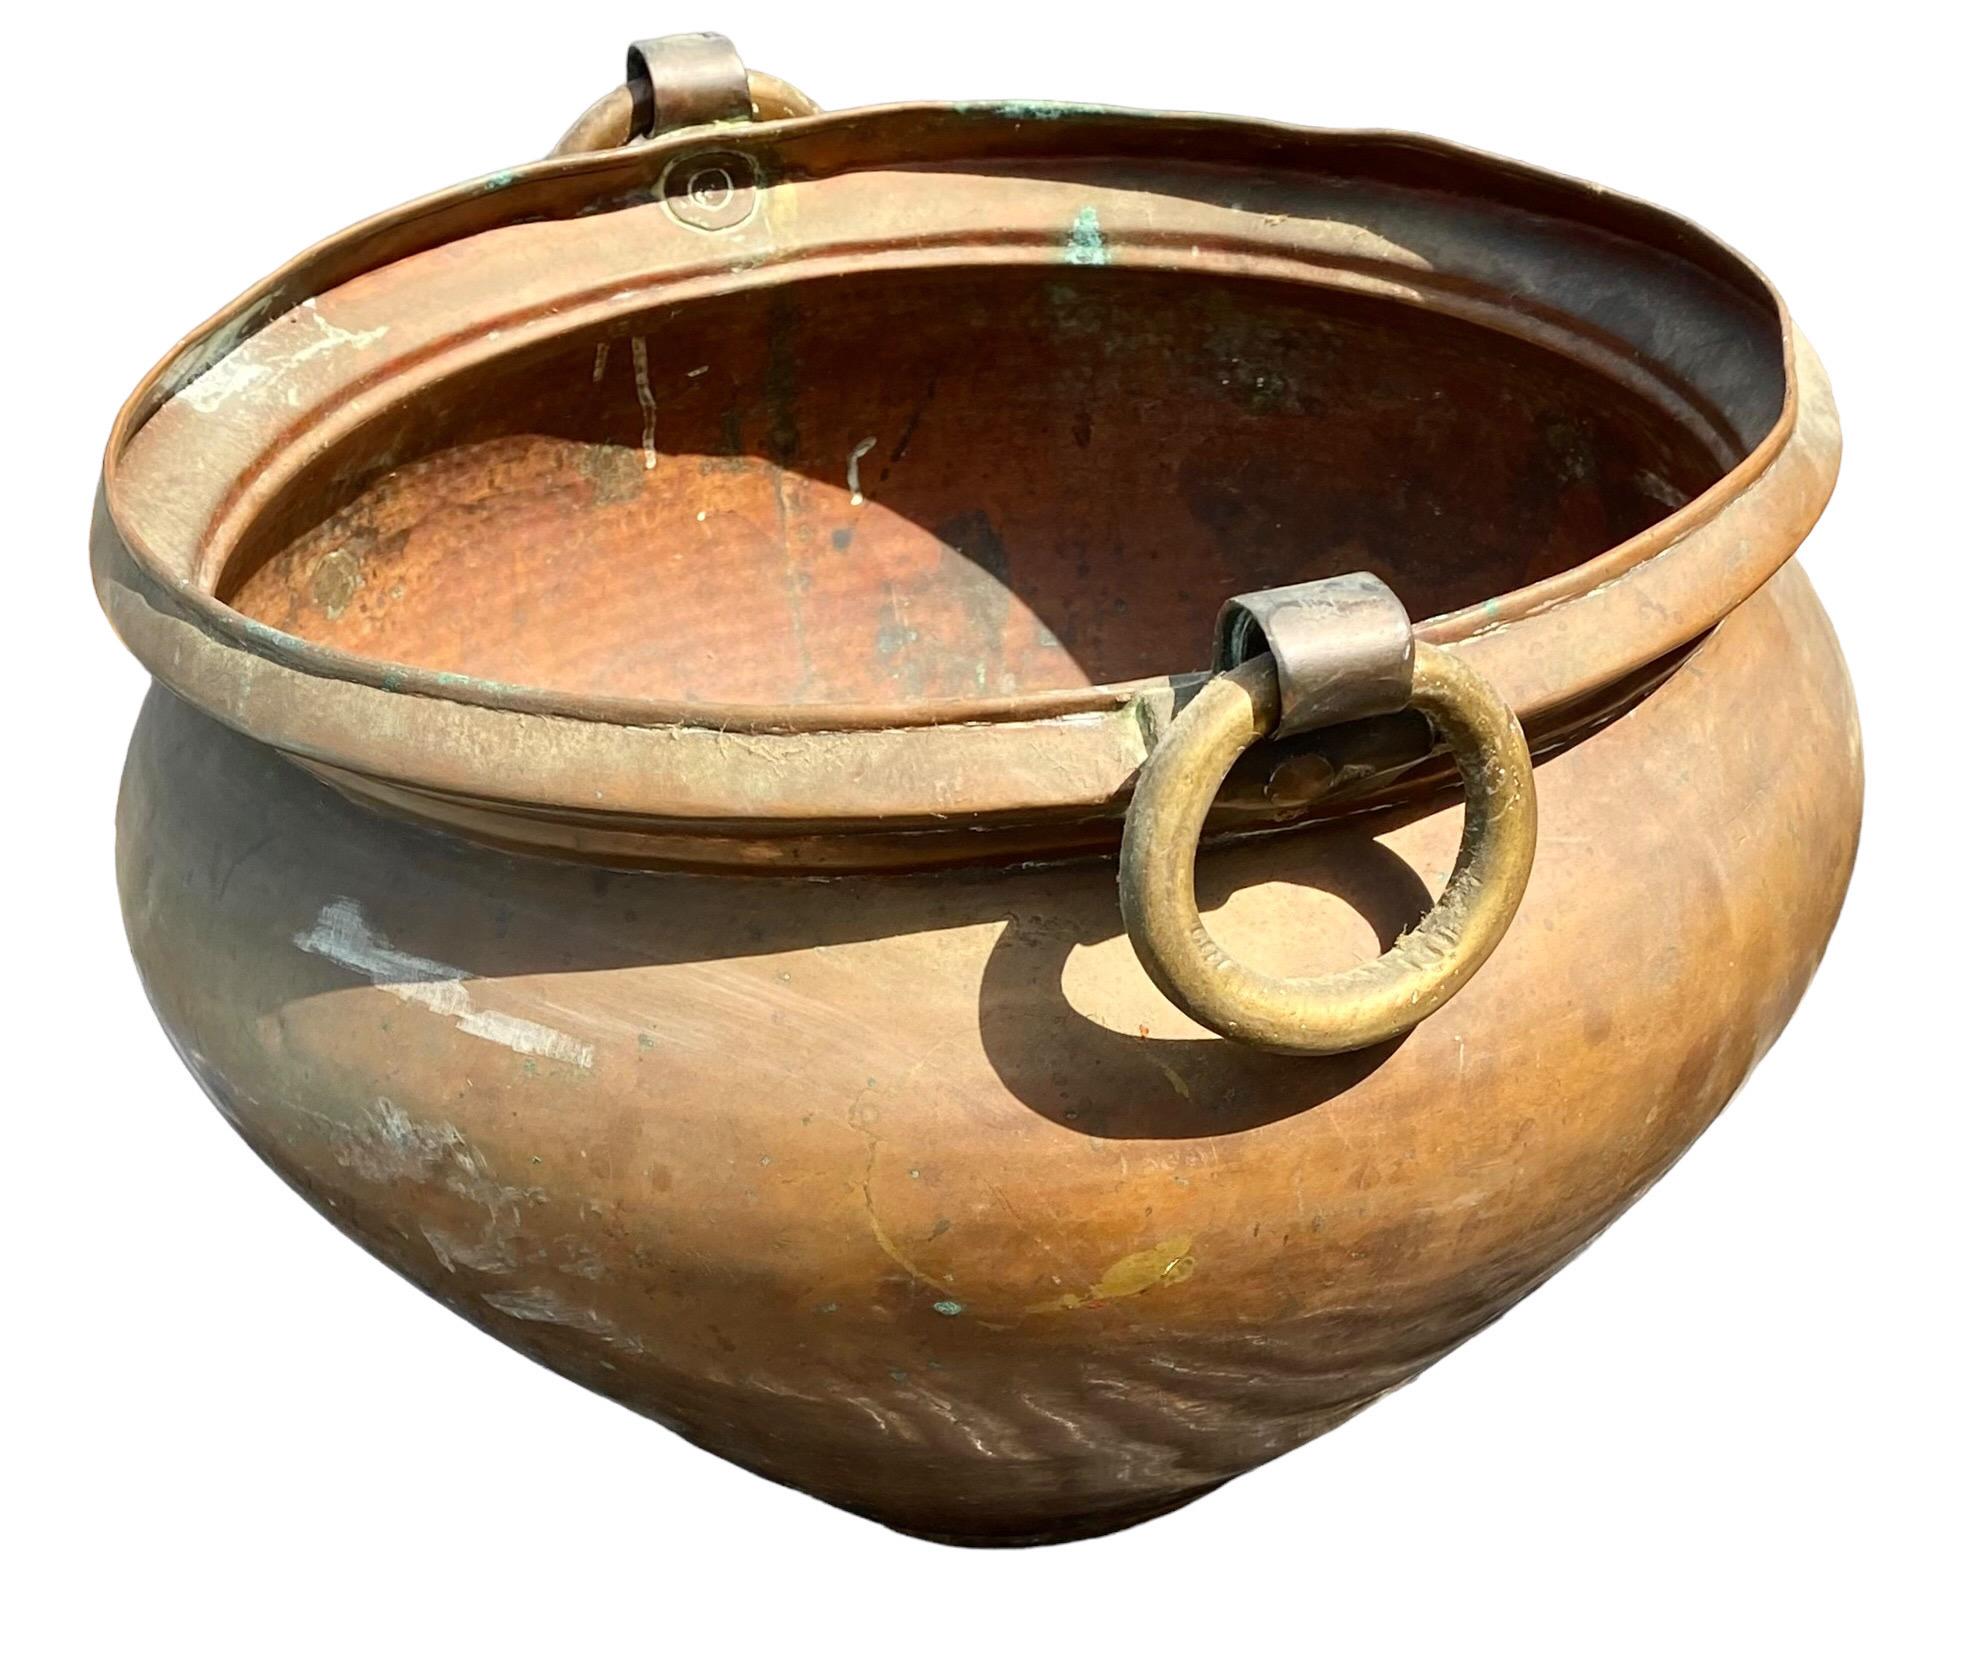 A 1950's-1960's handcrafted Turkish tribal, copper, iron and brass water pot. In original condition, non-altered with an old outstanding patina and color. Beautiful Verdi-Gris in the bottom interior. Heavy and solid.